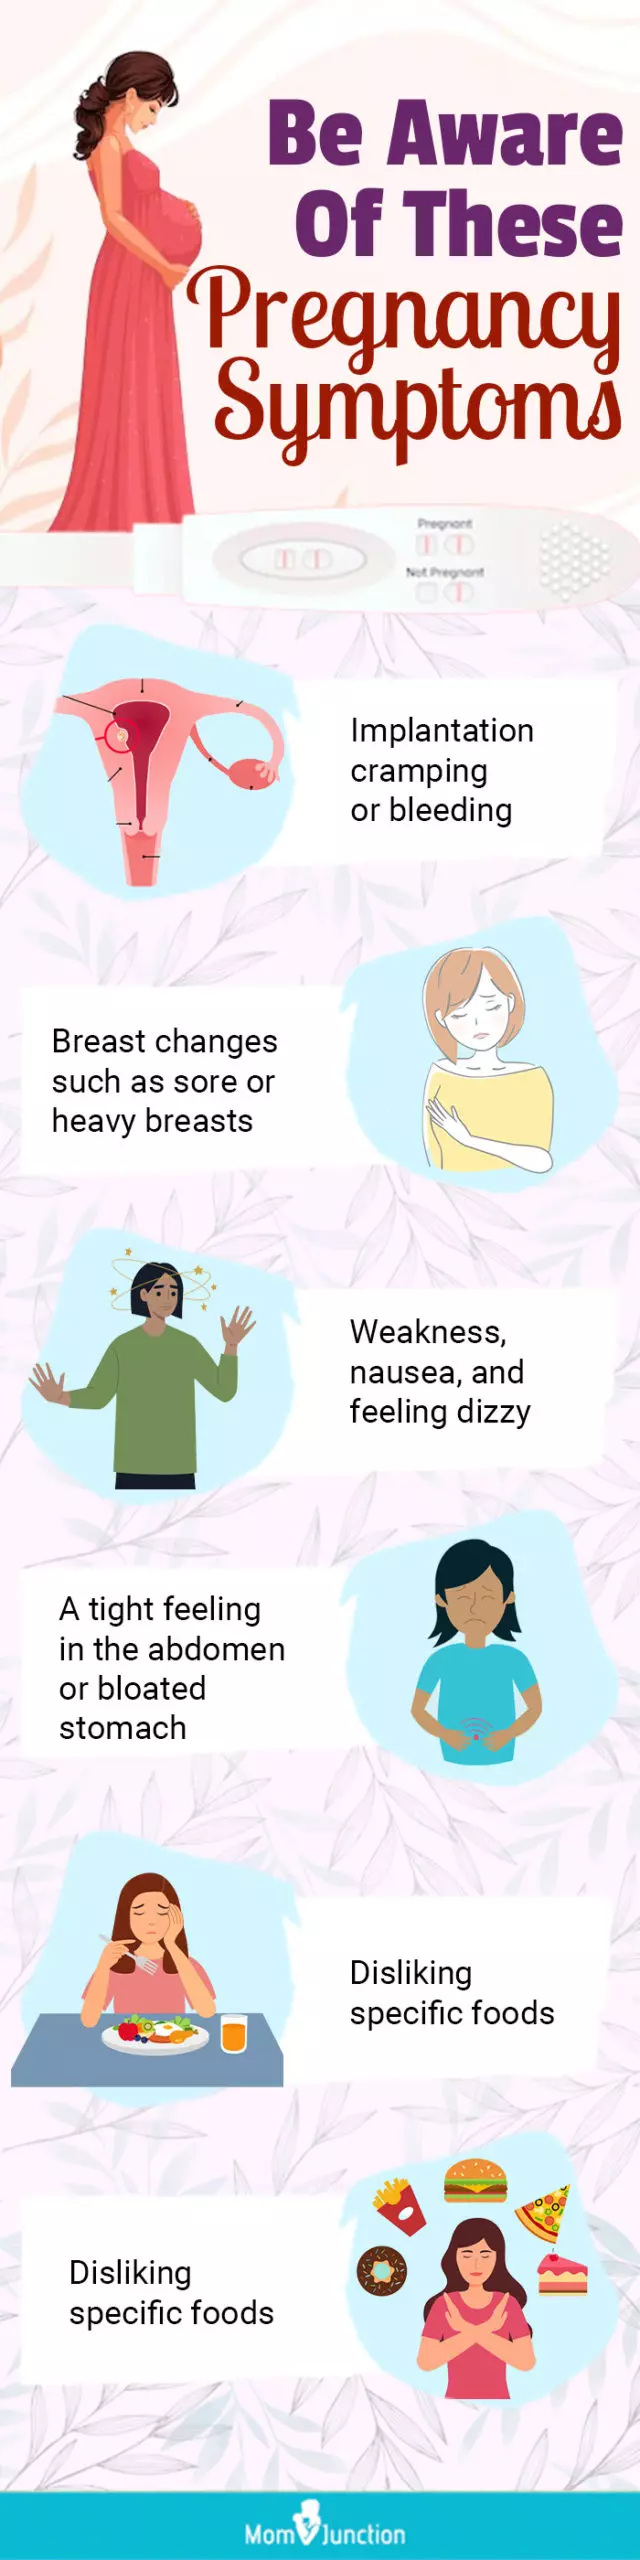 be aware of these pregnancy symptoms (infographic)